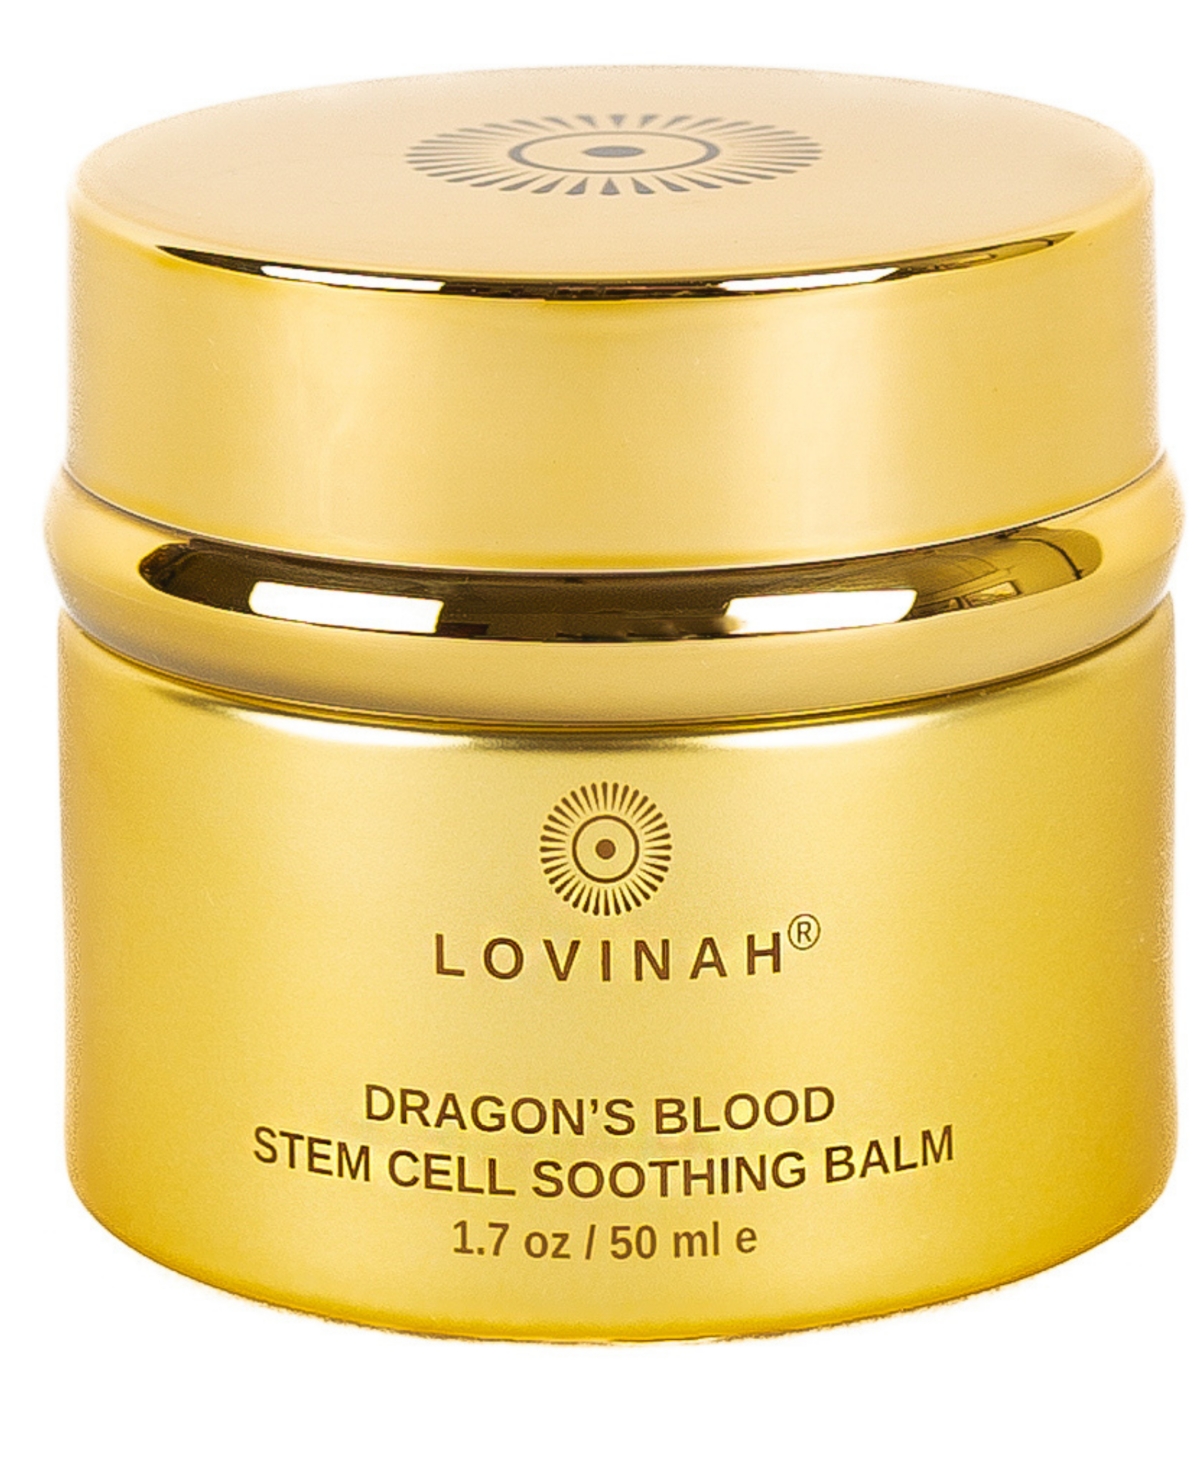 Lovinah Skincare Dragon's Blood Stem Cell and Ceramide Soothing Balm, 1.7 Oz